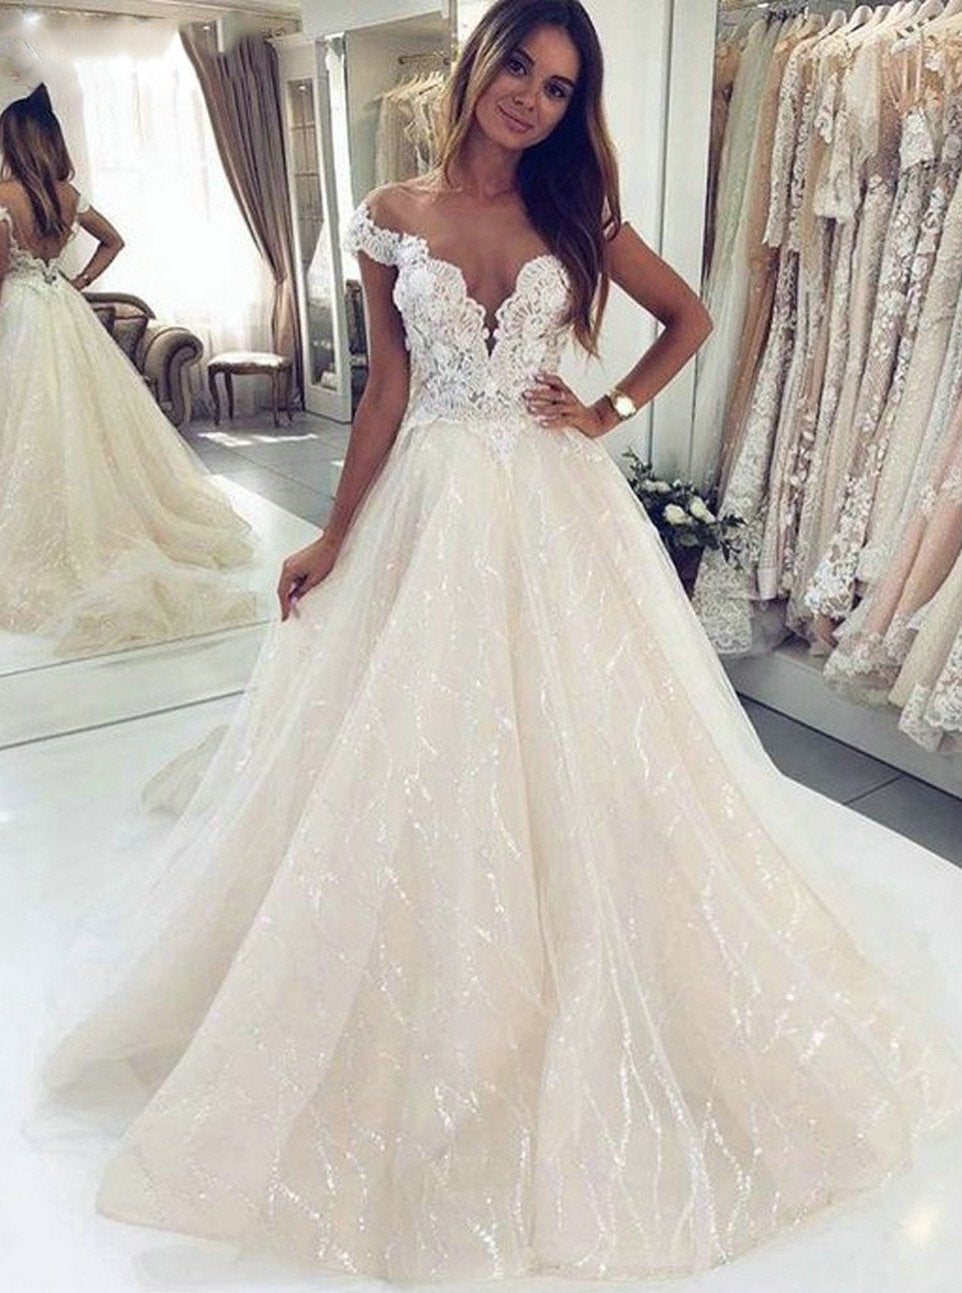 Off Shoulder Lace Beach Wedding Dress with Sequined Appliques PW127